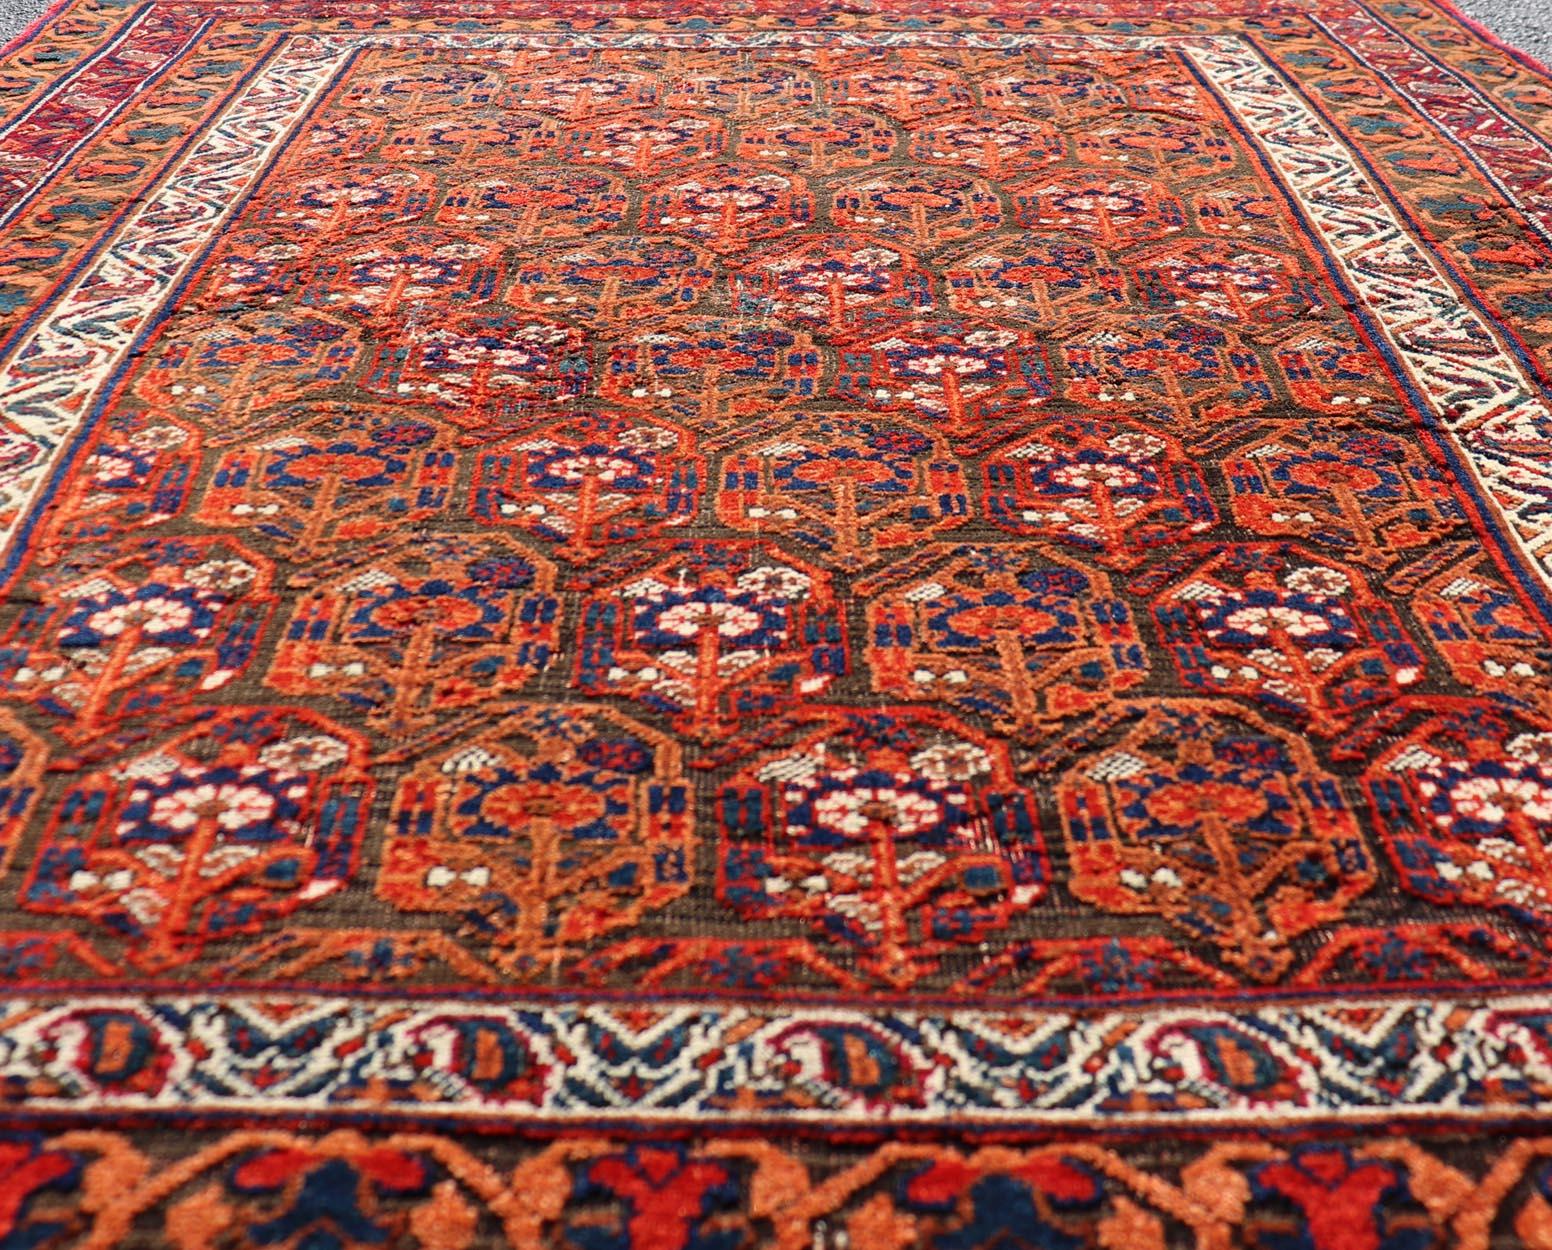  Fine Persian Antique Afshar Rug in Orange and Copper Background & Multi Colors. Keivan Woven Arts/ Rug/X23-0812-93, Antique Afshar Early 20th Century. 
Measures: 4'2 x 5'2 
Unique Botanical, rich symbolism, and fine intricacy contribute to the